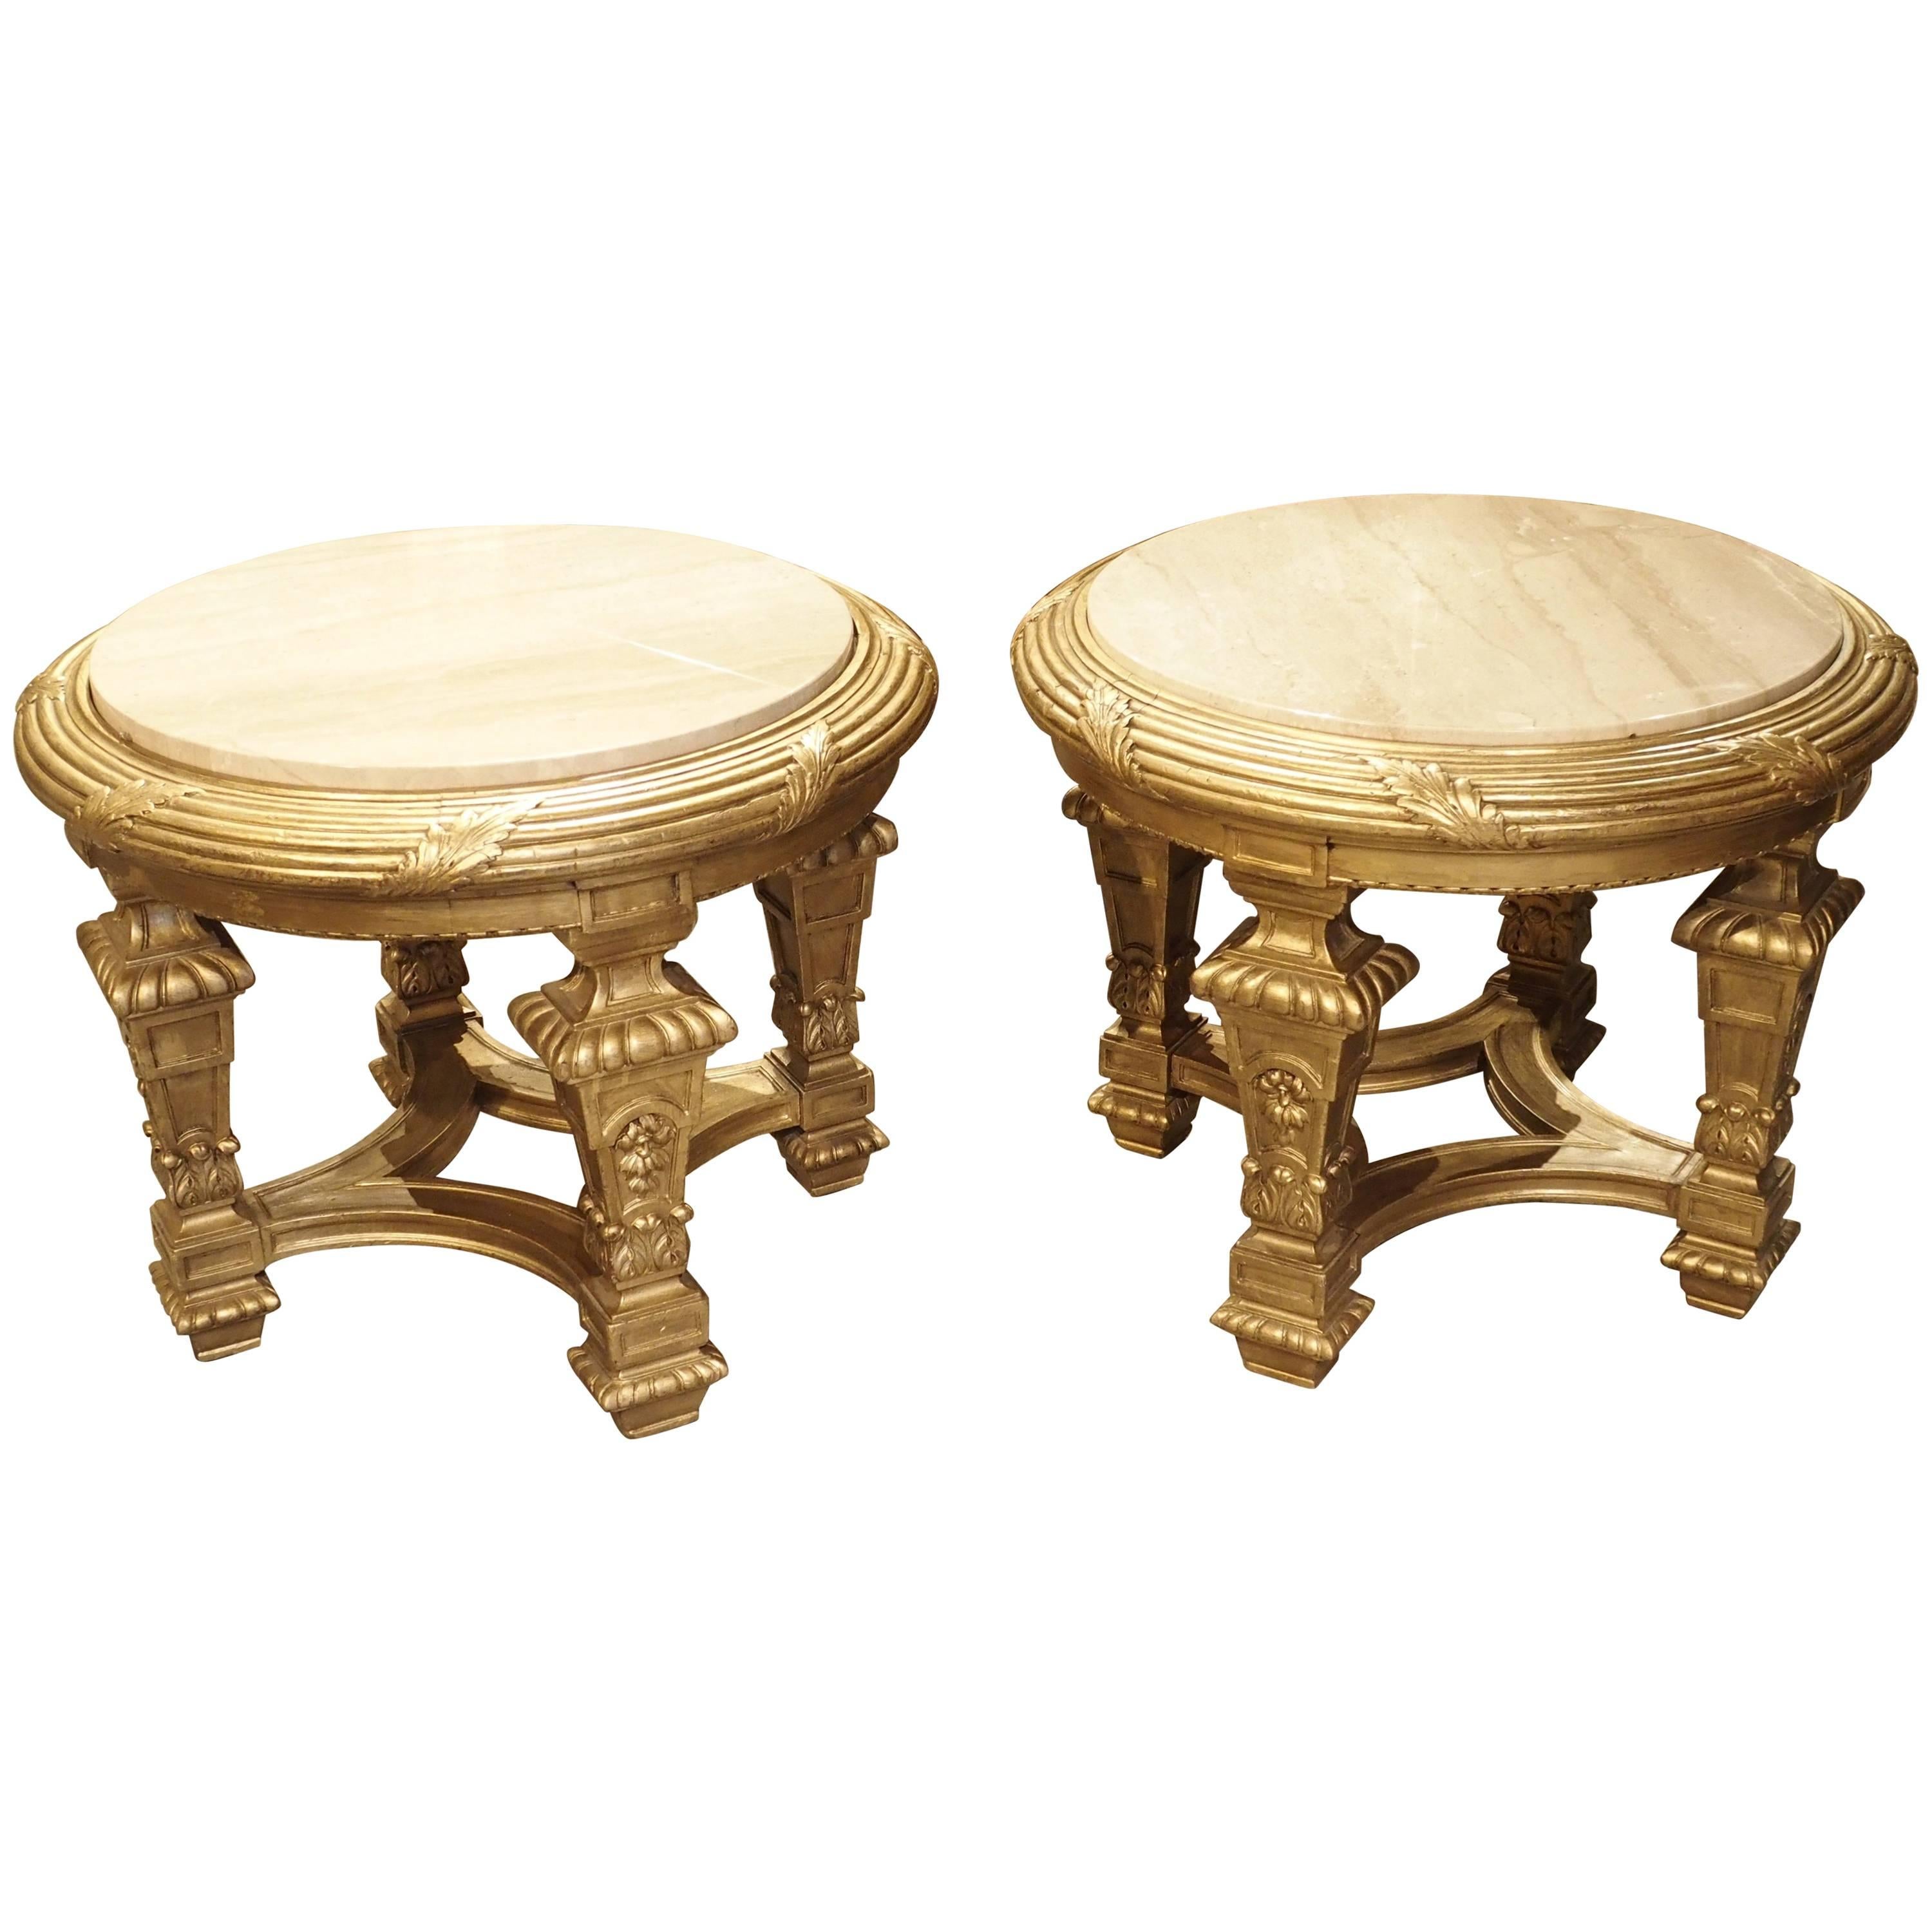 Pair of Louis XIV Style Giltwood and Marble Side Tables from France